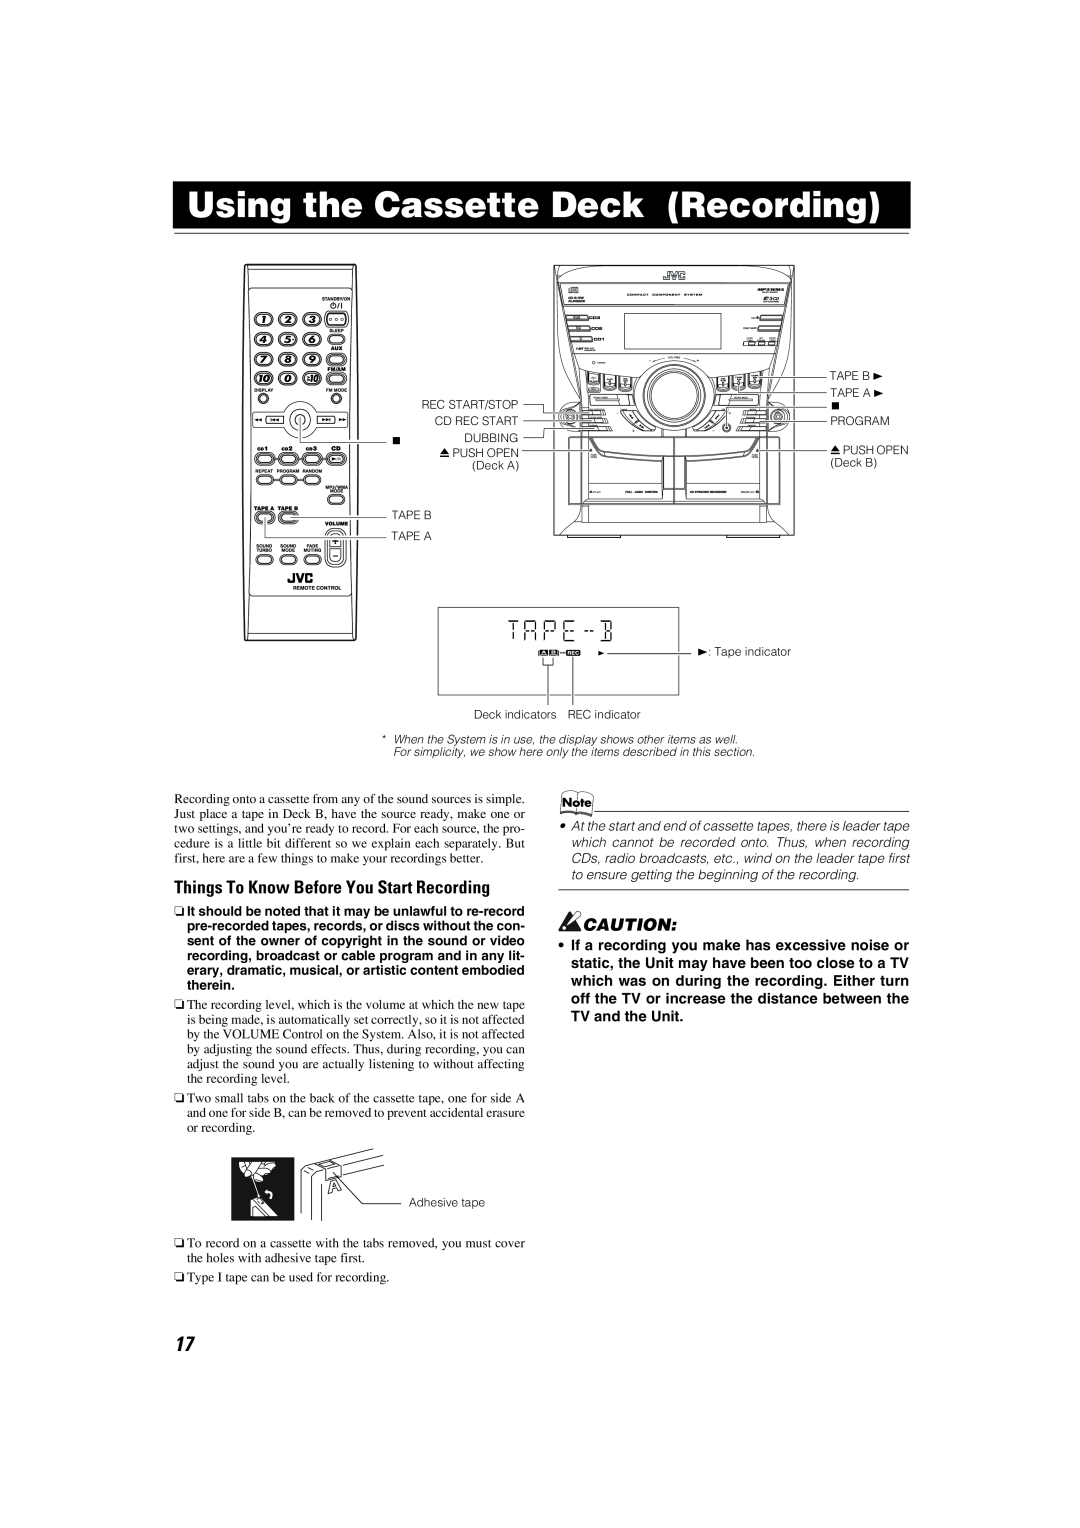 JVC MX-KC45 manual Using the Cassette Deck Recording, Things To Know Before You Start Recording 